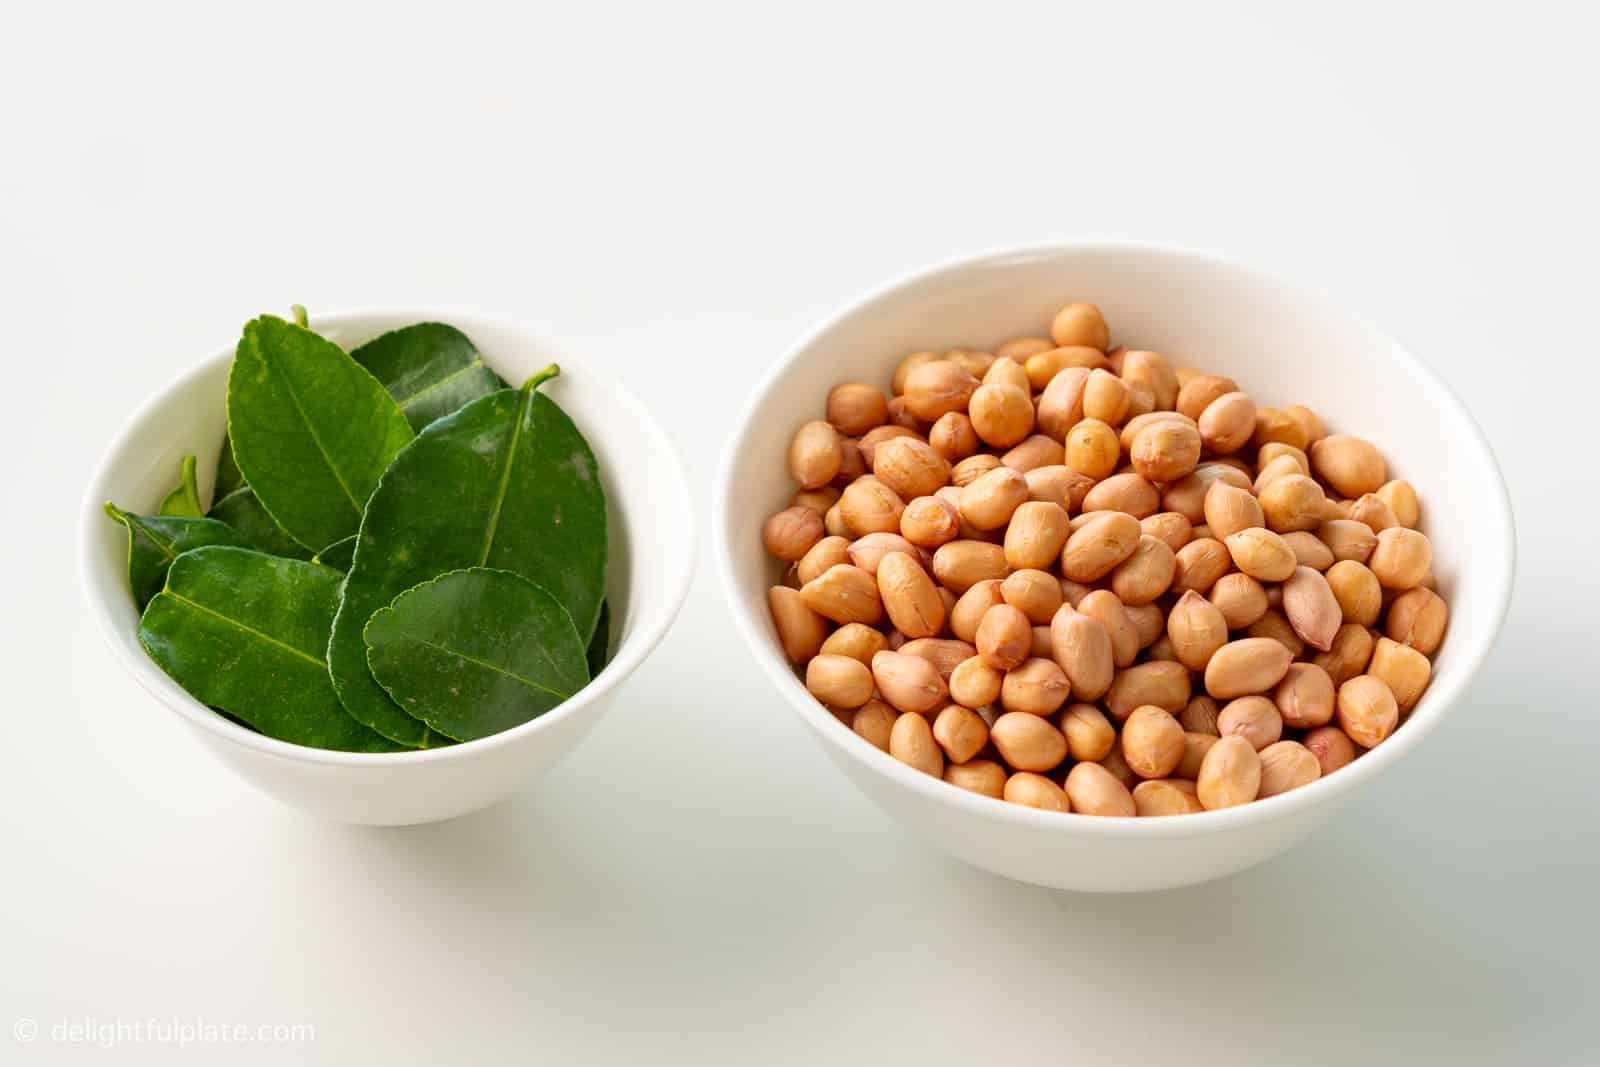 a bowl of raw peanuts and a bowl of kaffir lime leaves.